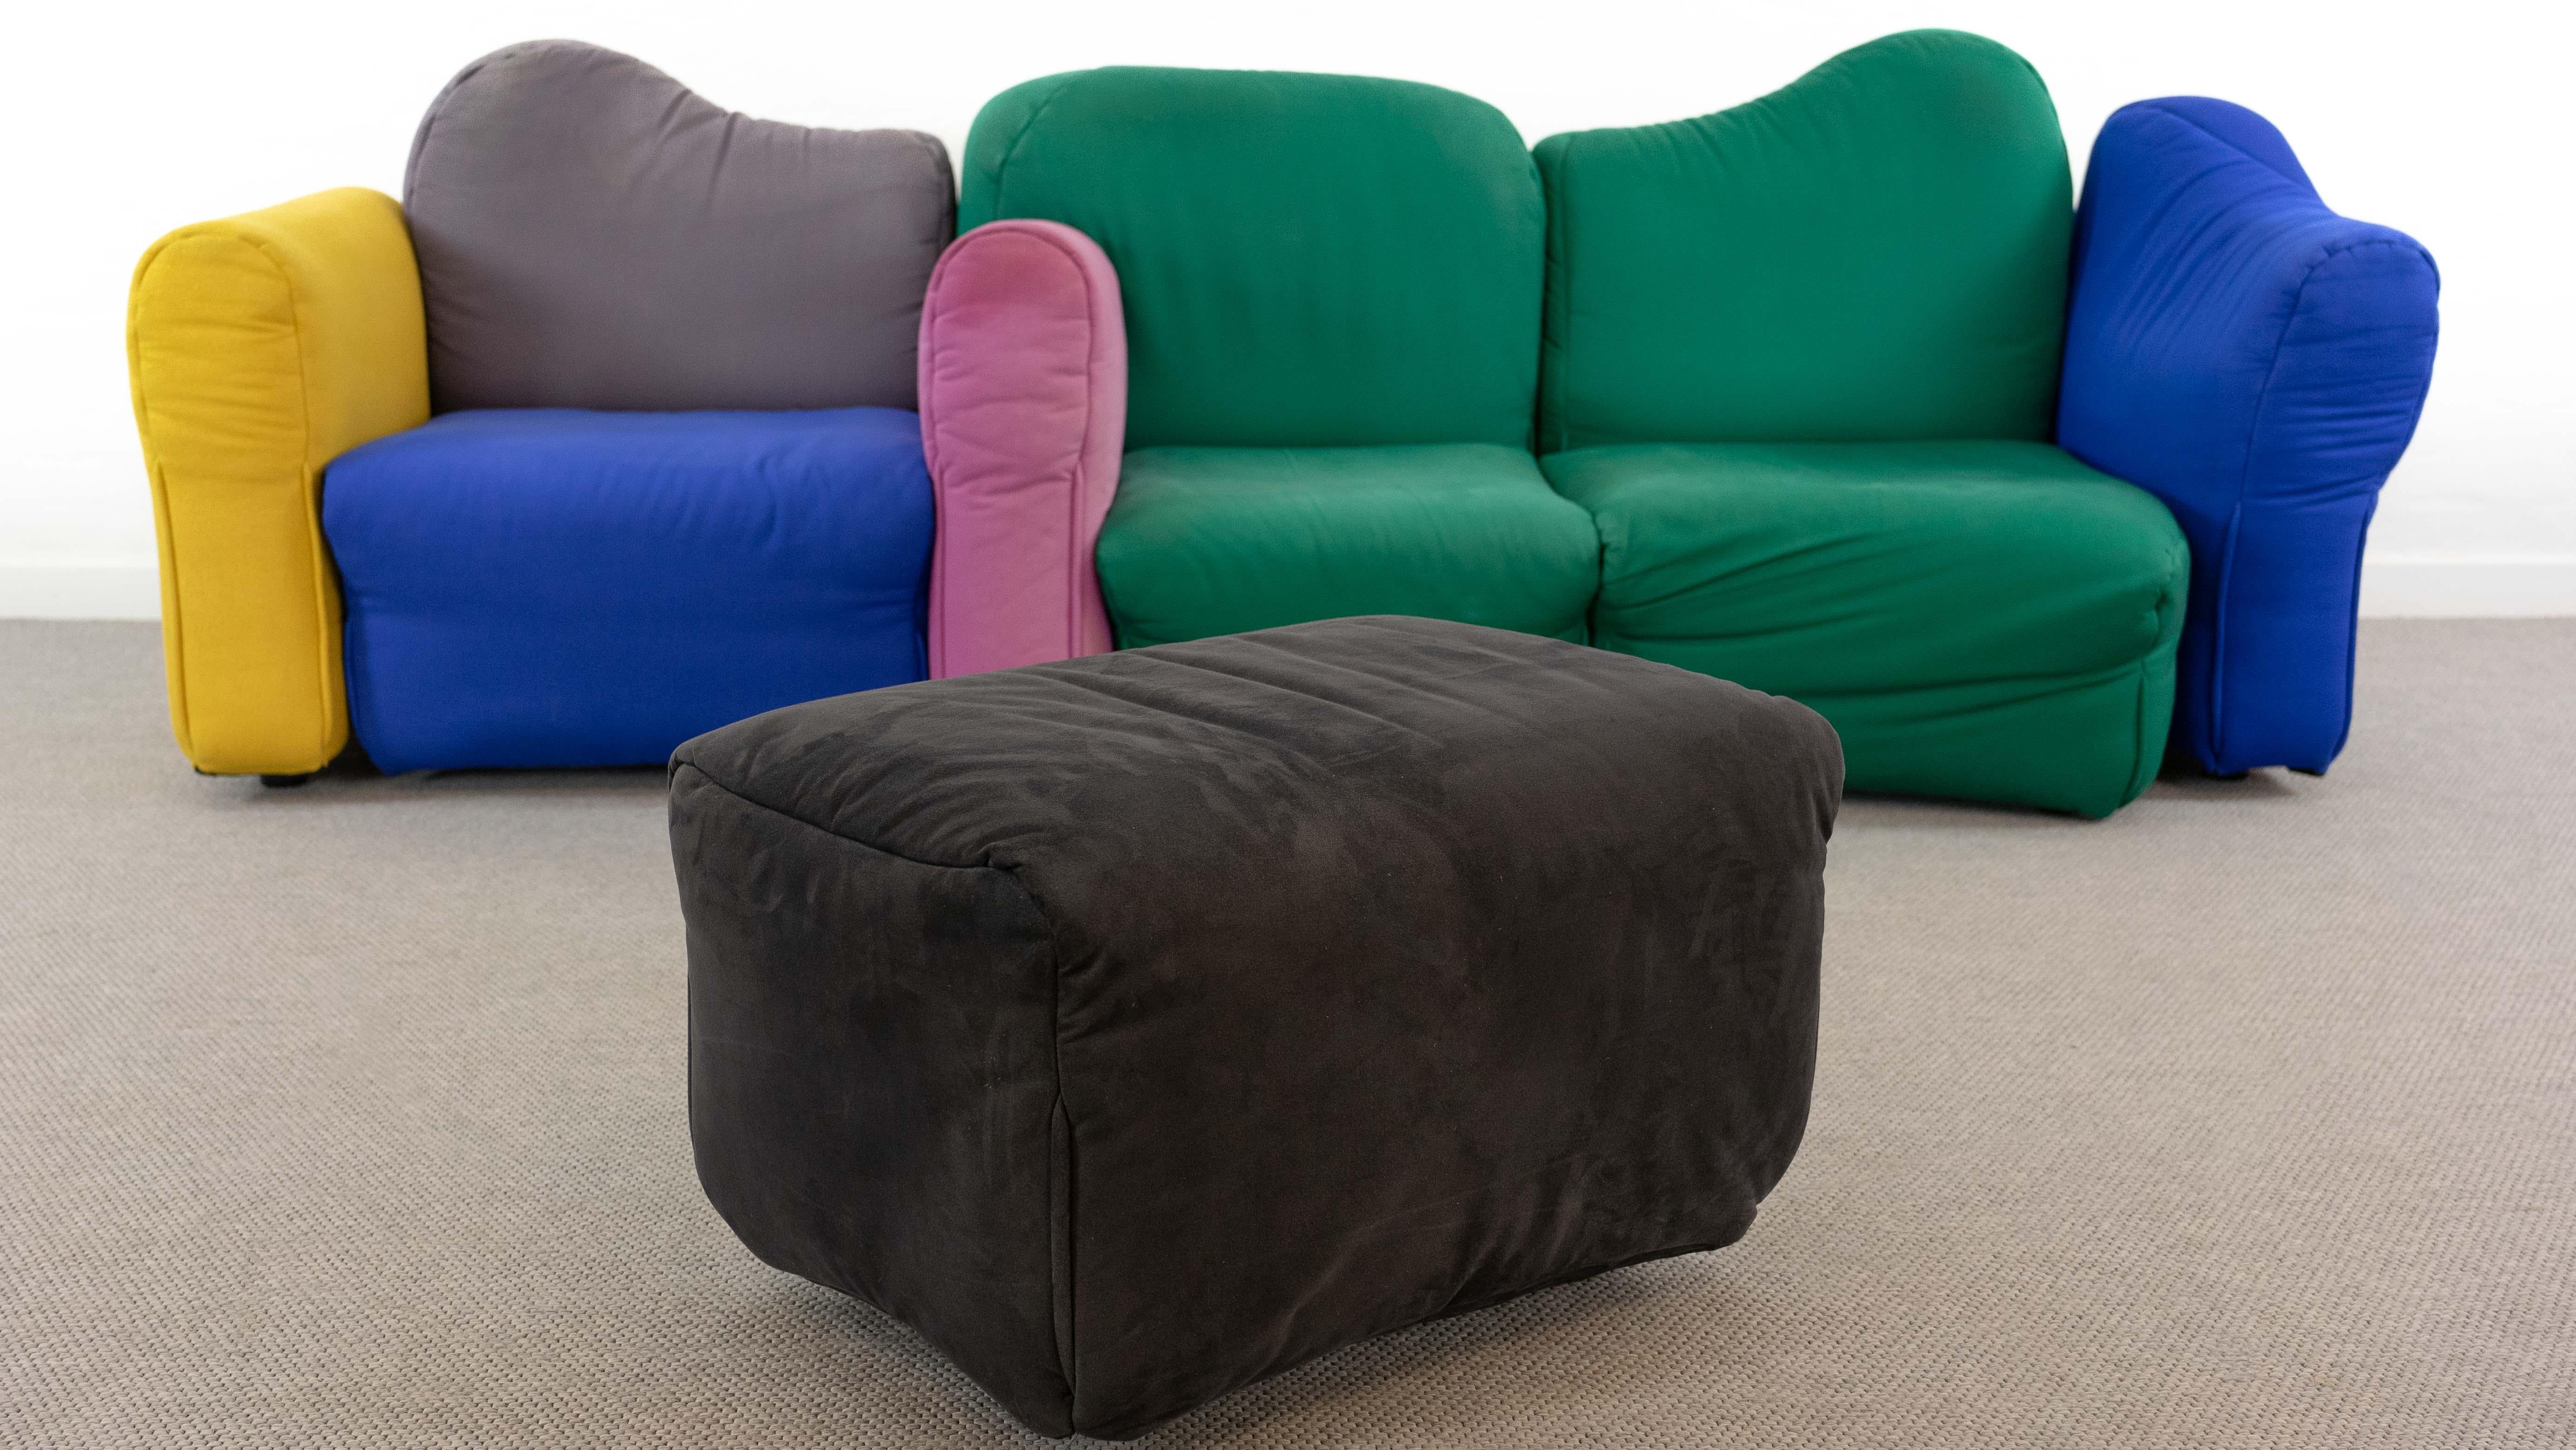 Late 20th Century Cannaregio Modular Sofa with Footrest by Gaetano Pesce for Cassina, Italy 1986 For Sale